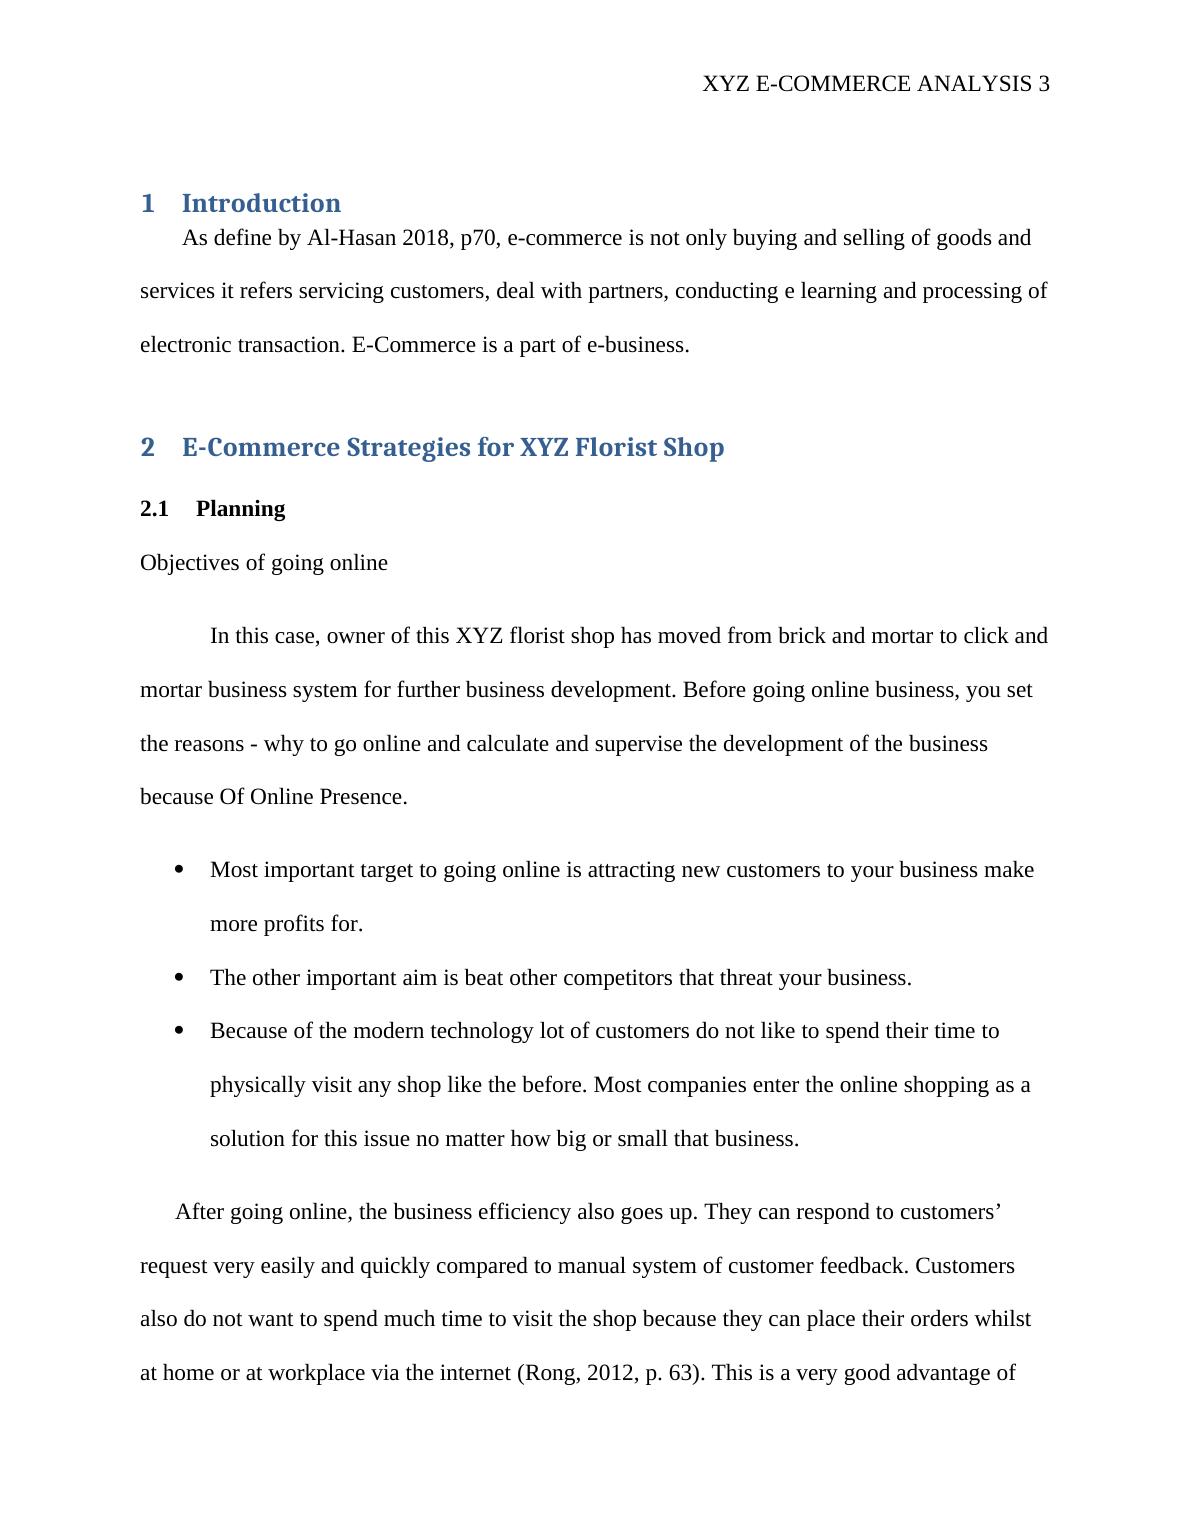 E-Commerce Analysis Assignment_3